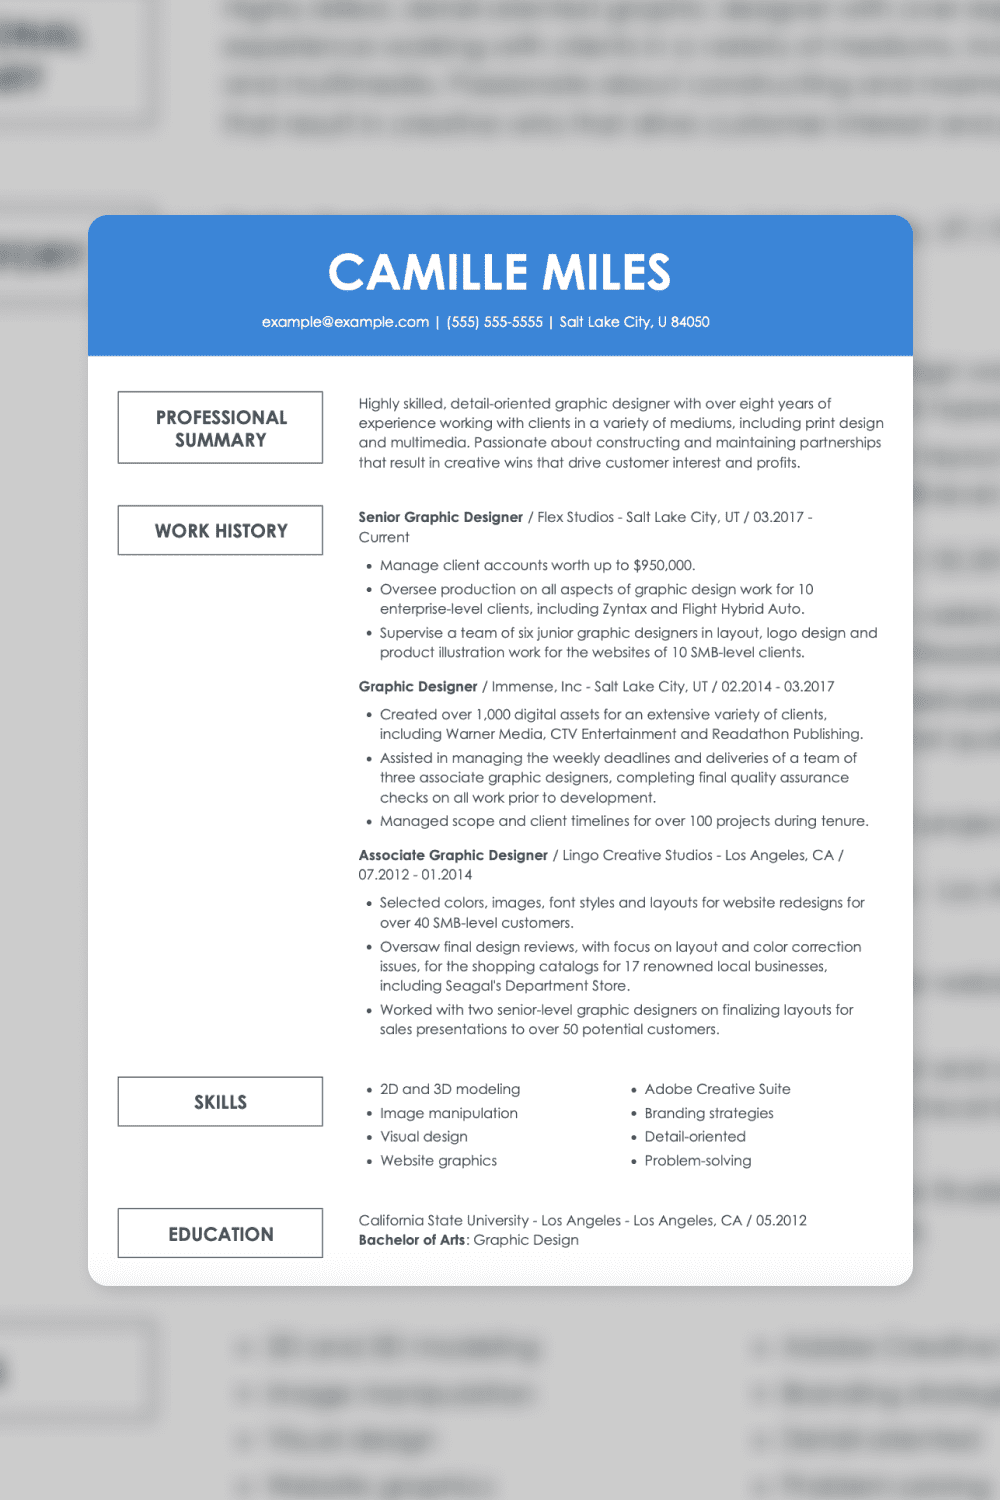 Resume image with blue header and two columns.